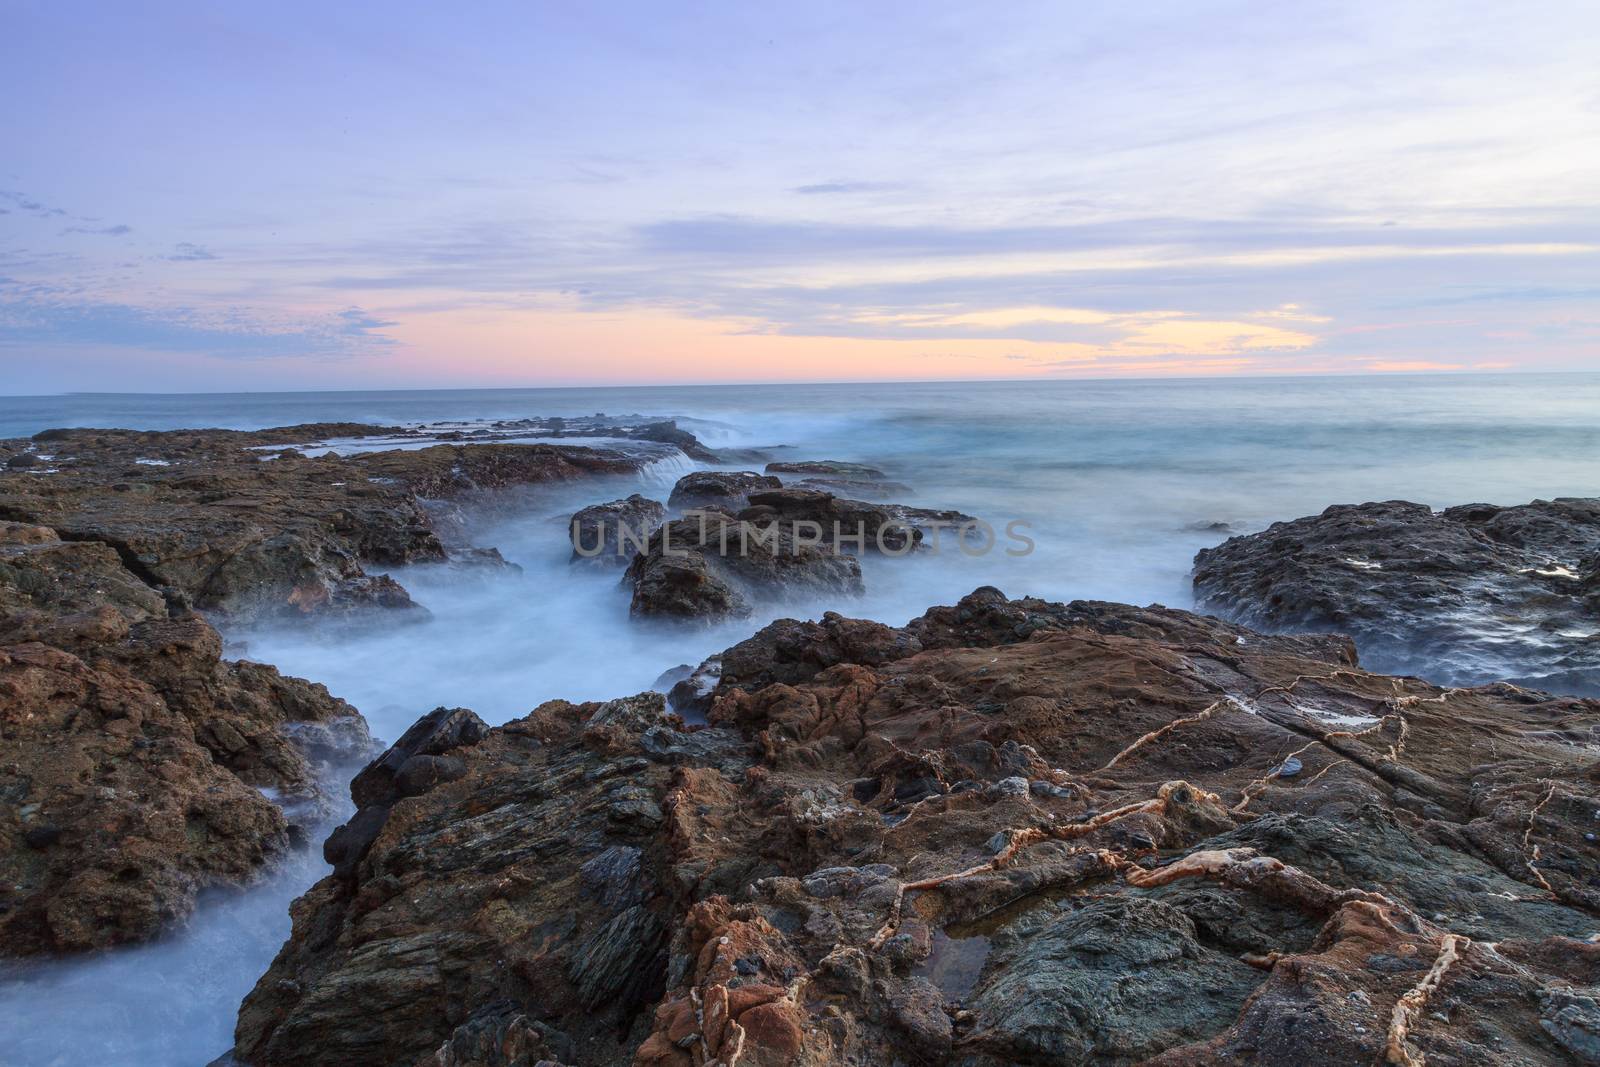 Long exposure of rocks in waves, giving a mist like effect over ocean in Laguna Beach, California at sunset